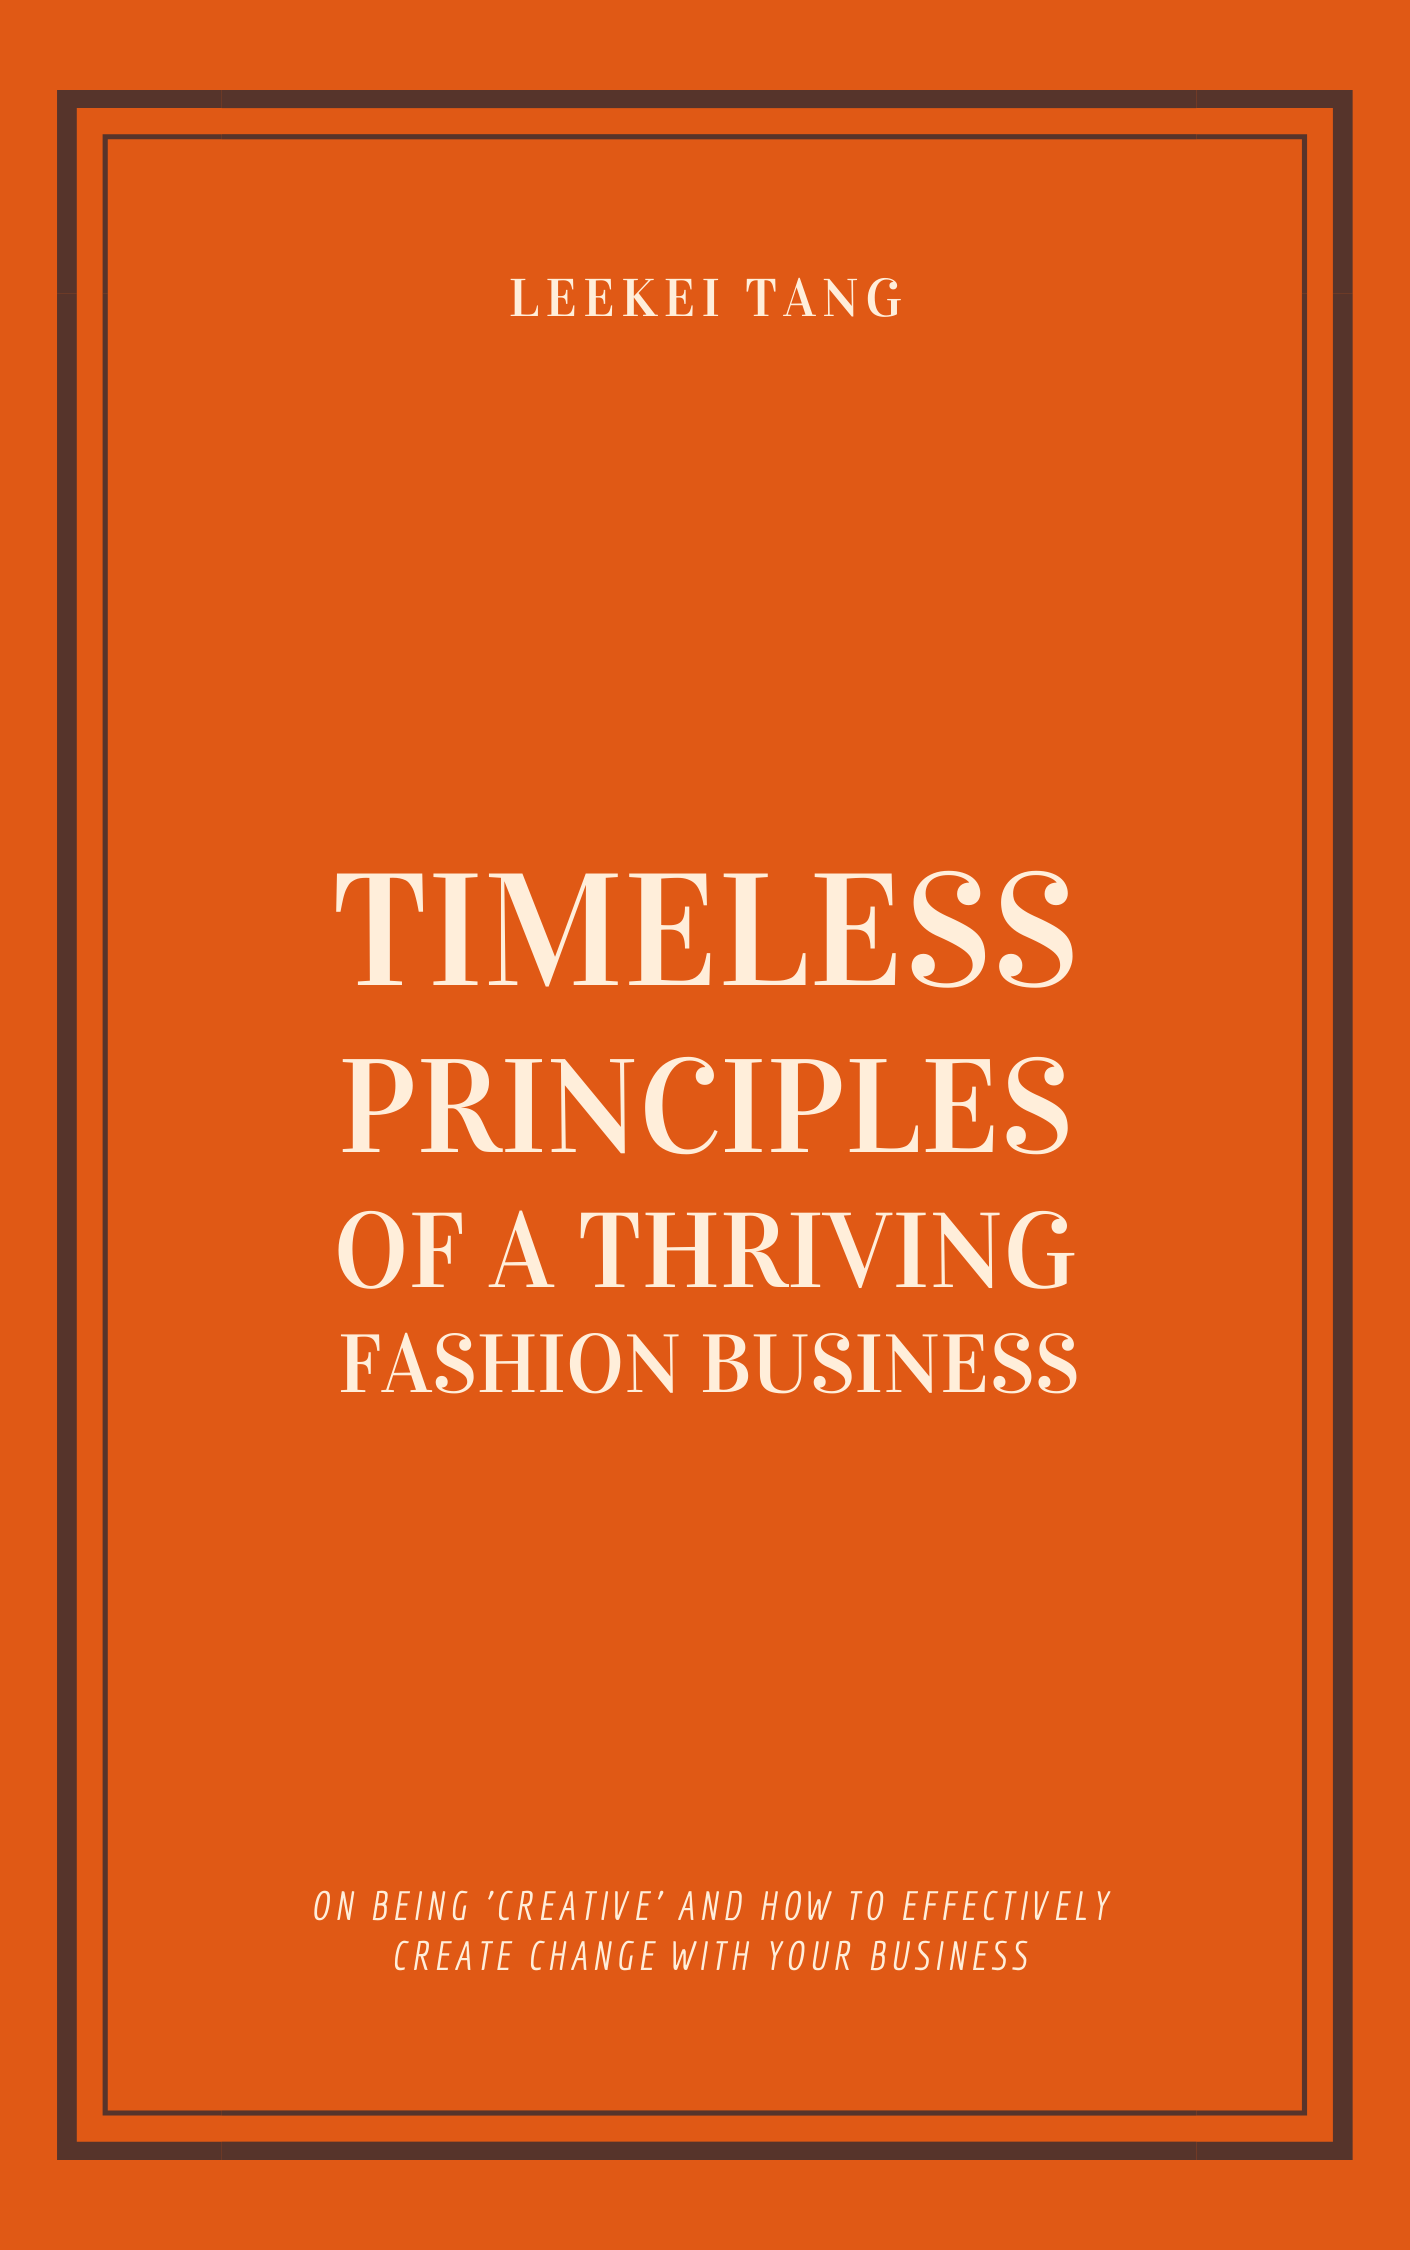 TIMELESS PRINCIPLES OF A THRIVING FASHION BUSINESS